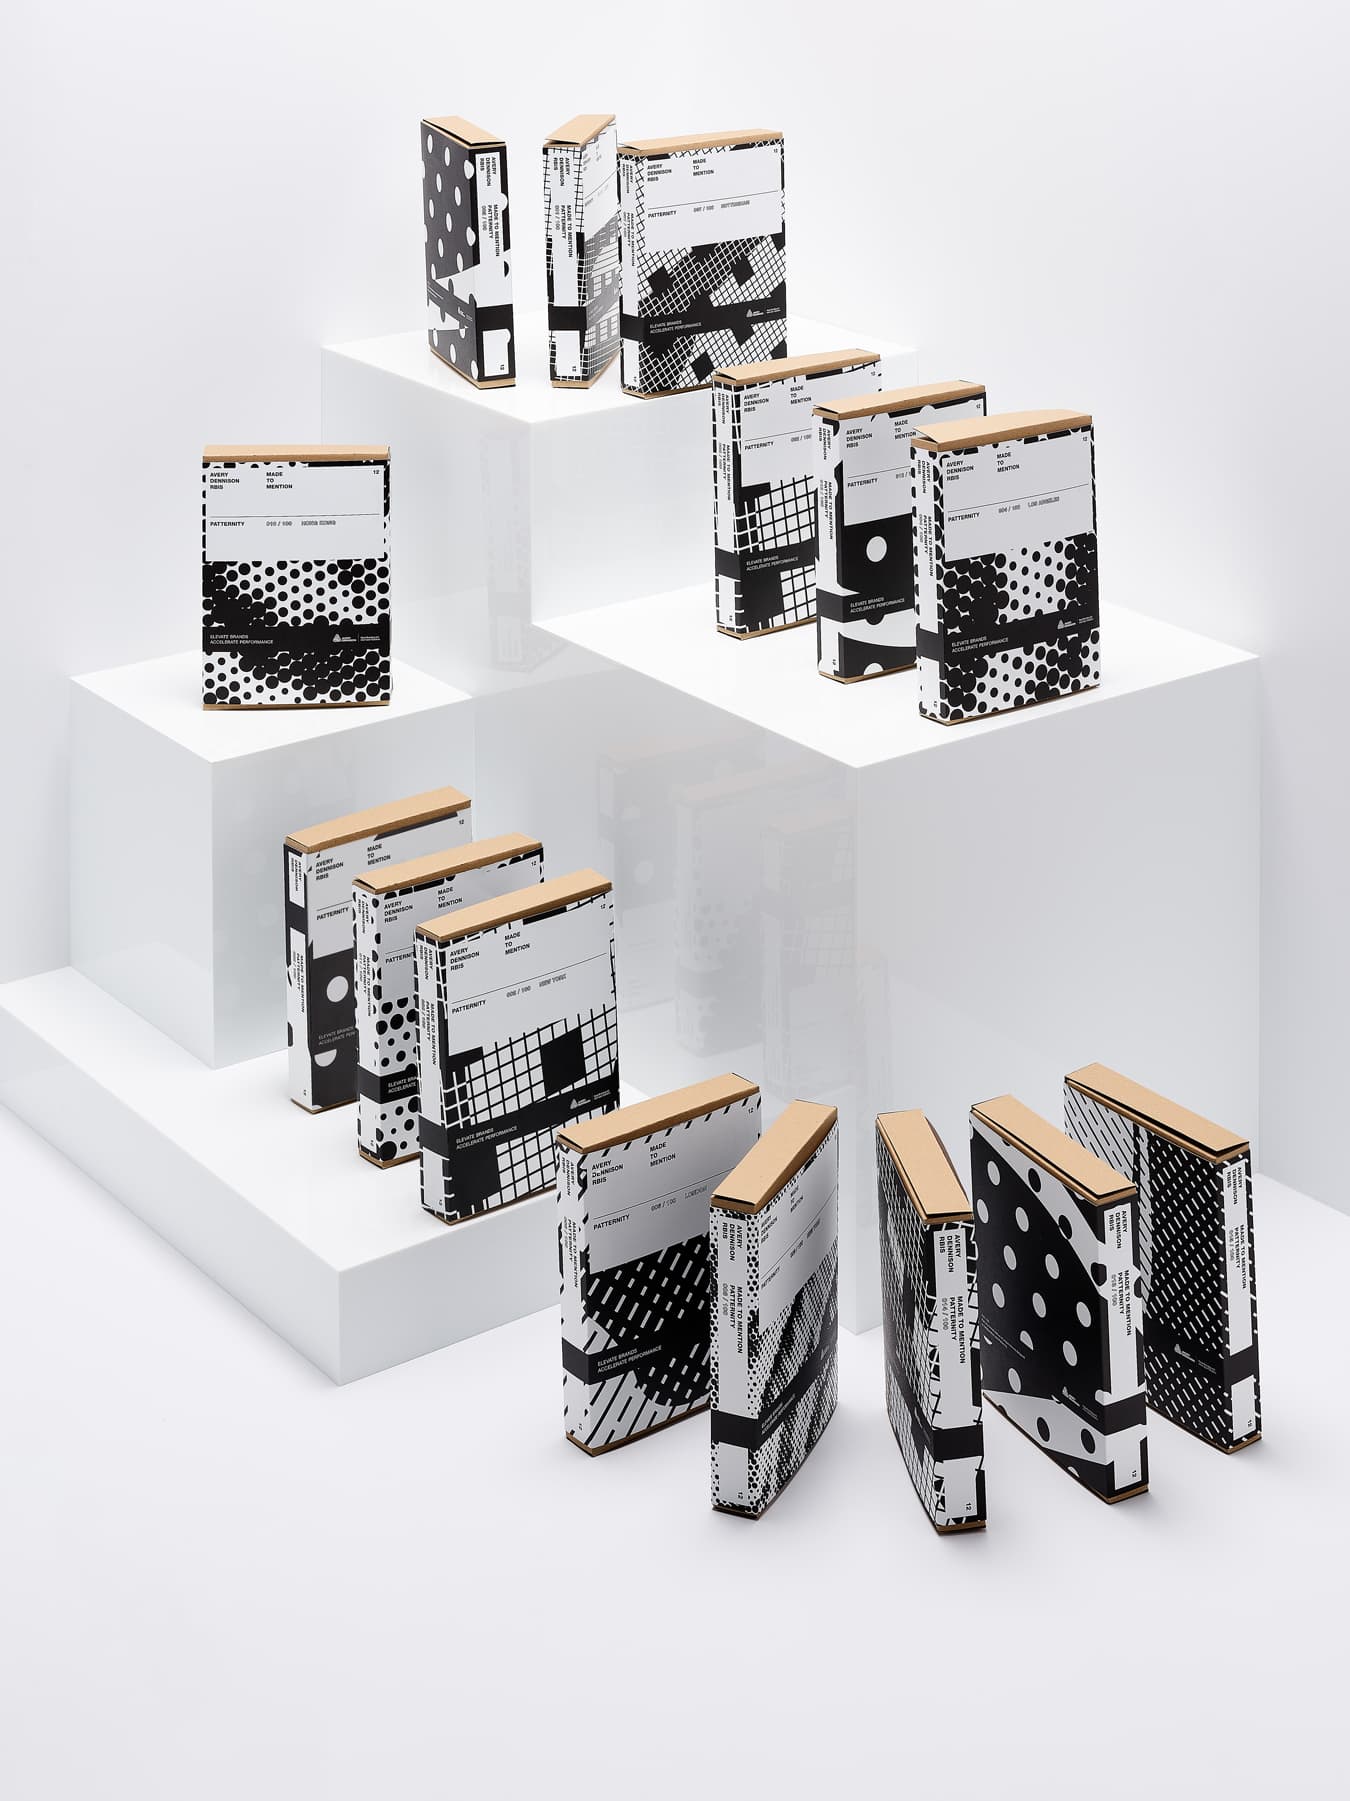 Avery Dennison collaboration with Patternity. Boxes containing lables